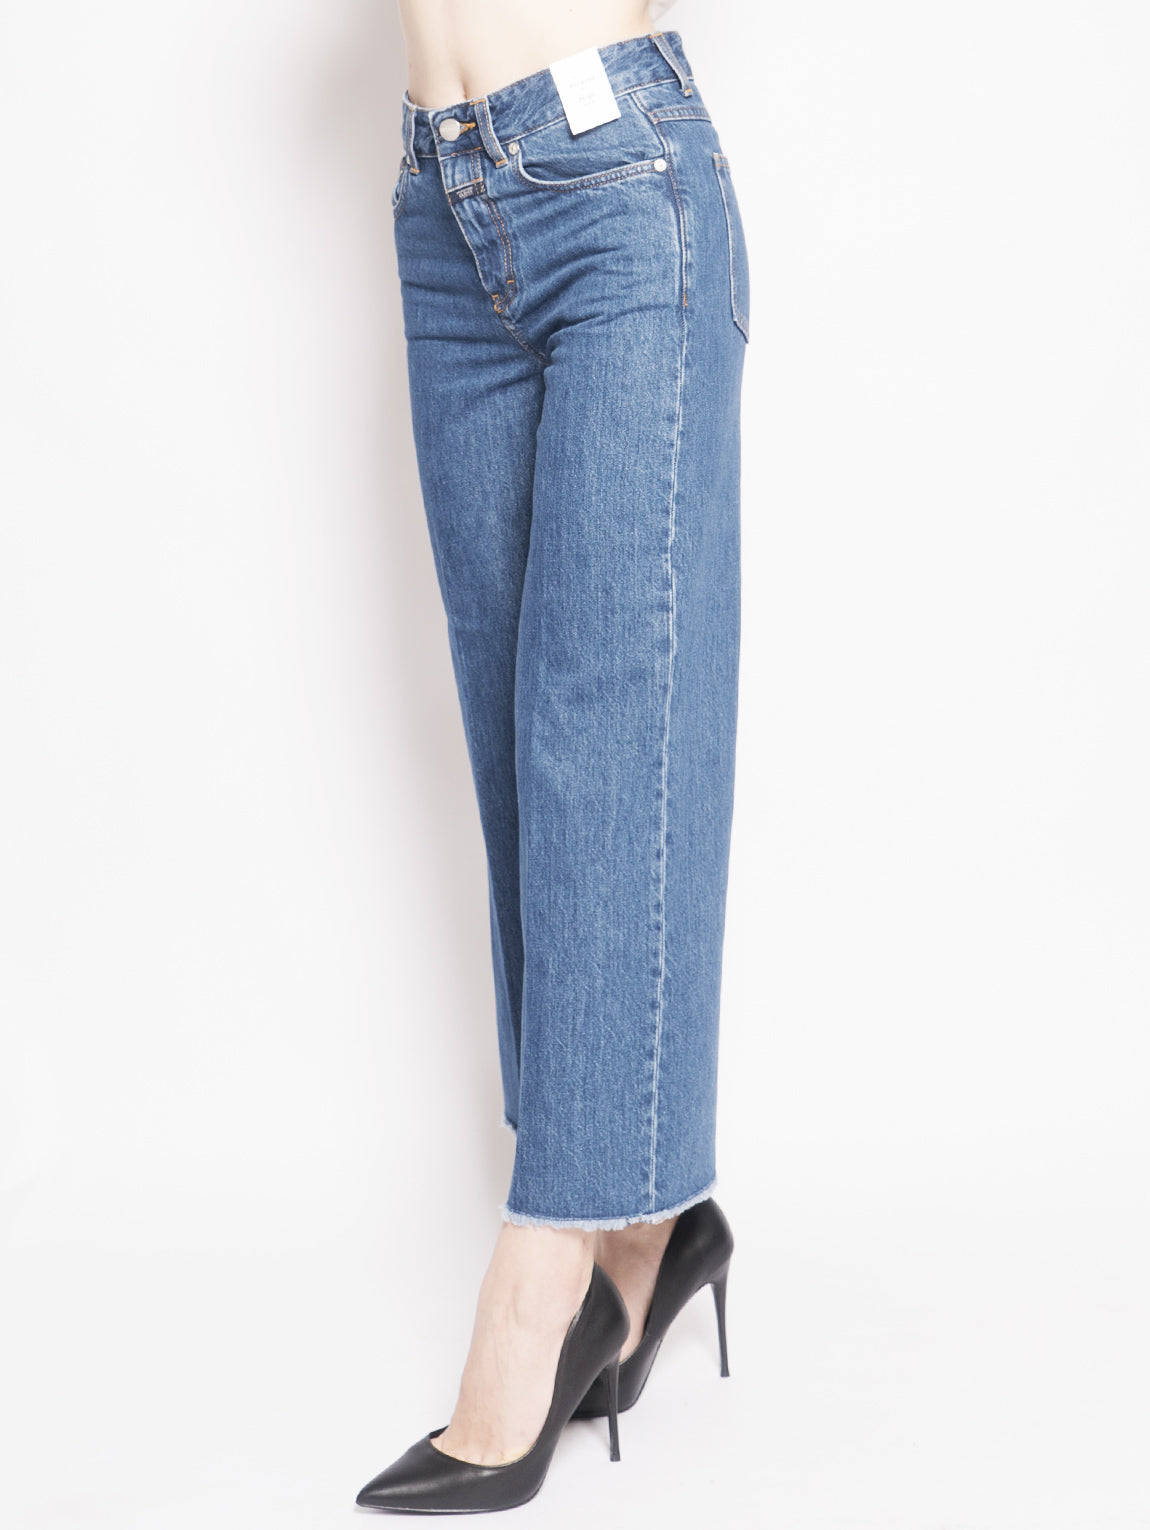 Jeans with Wide Leg Fringed Blue